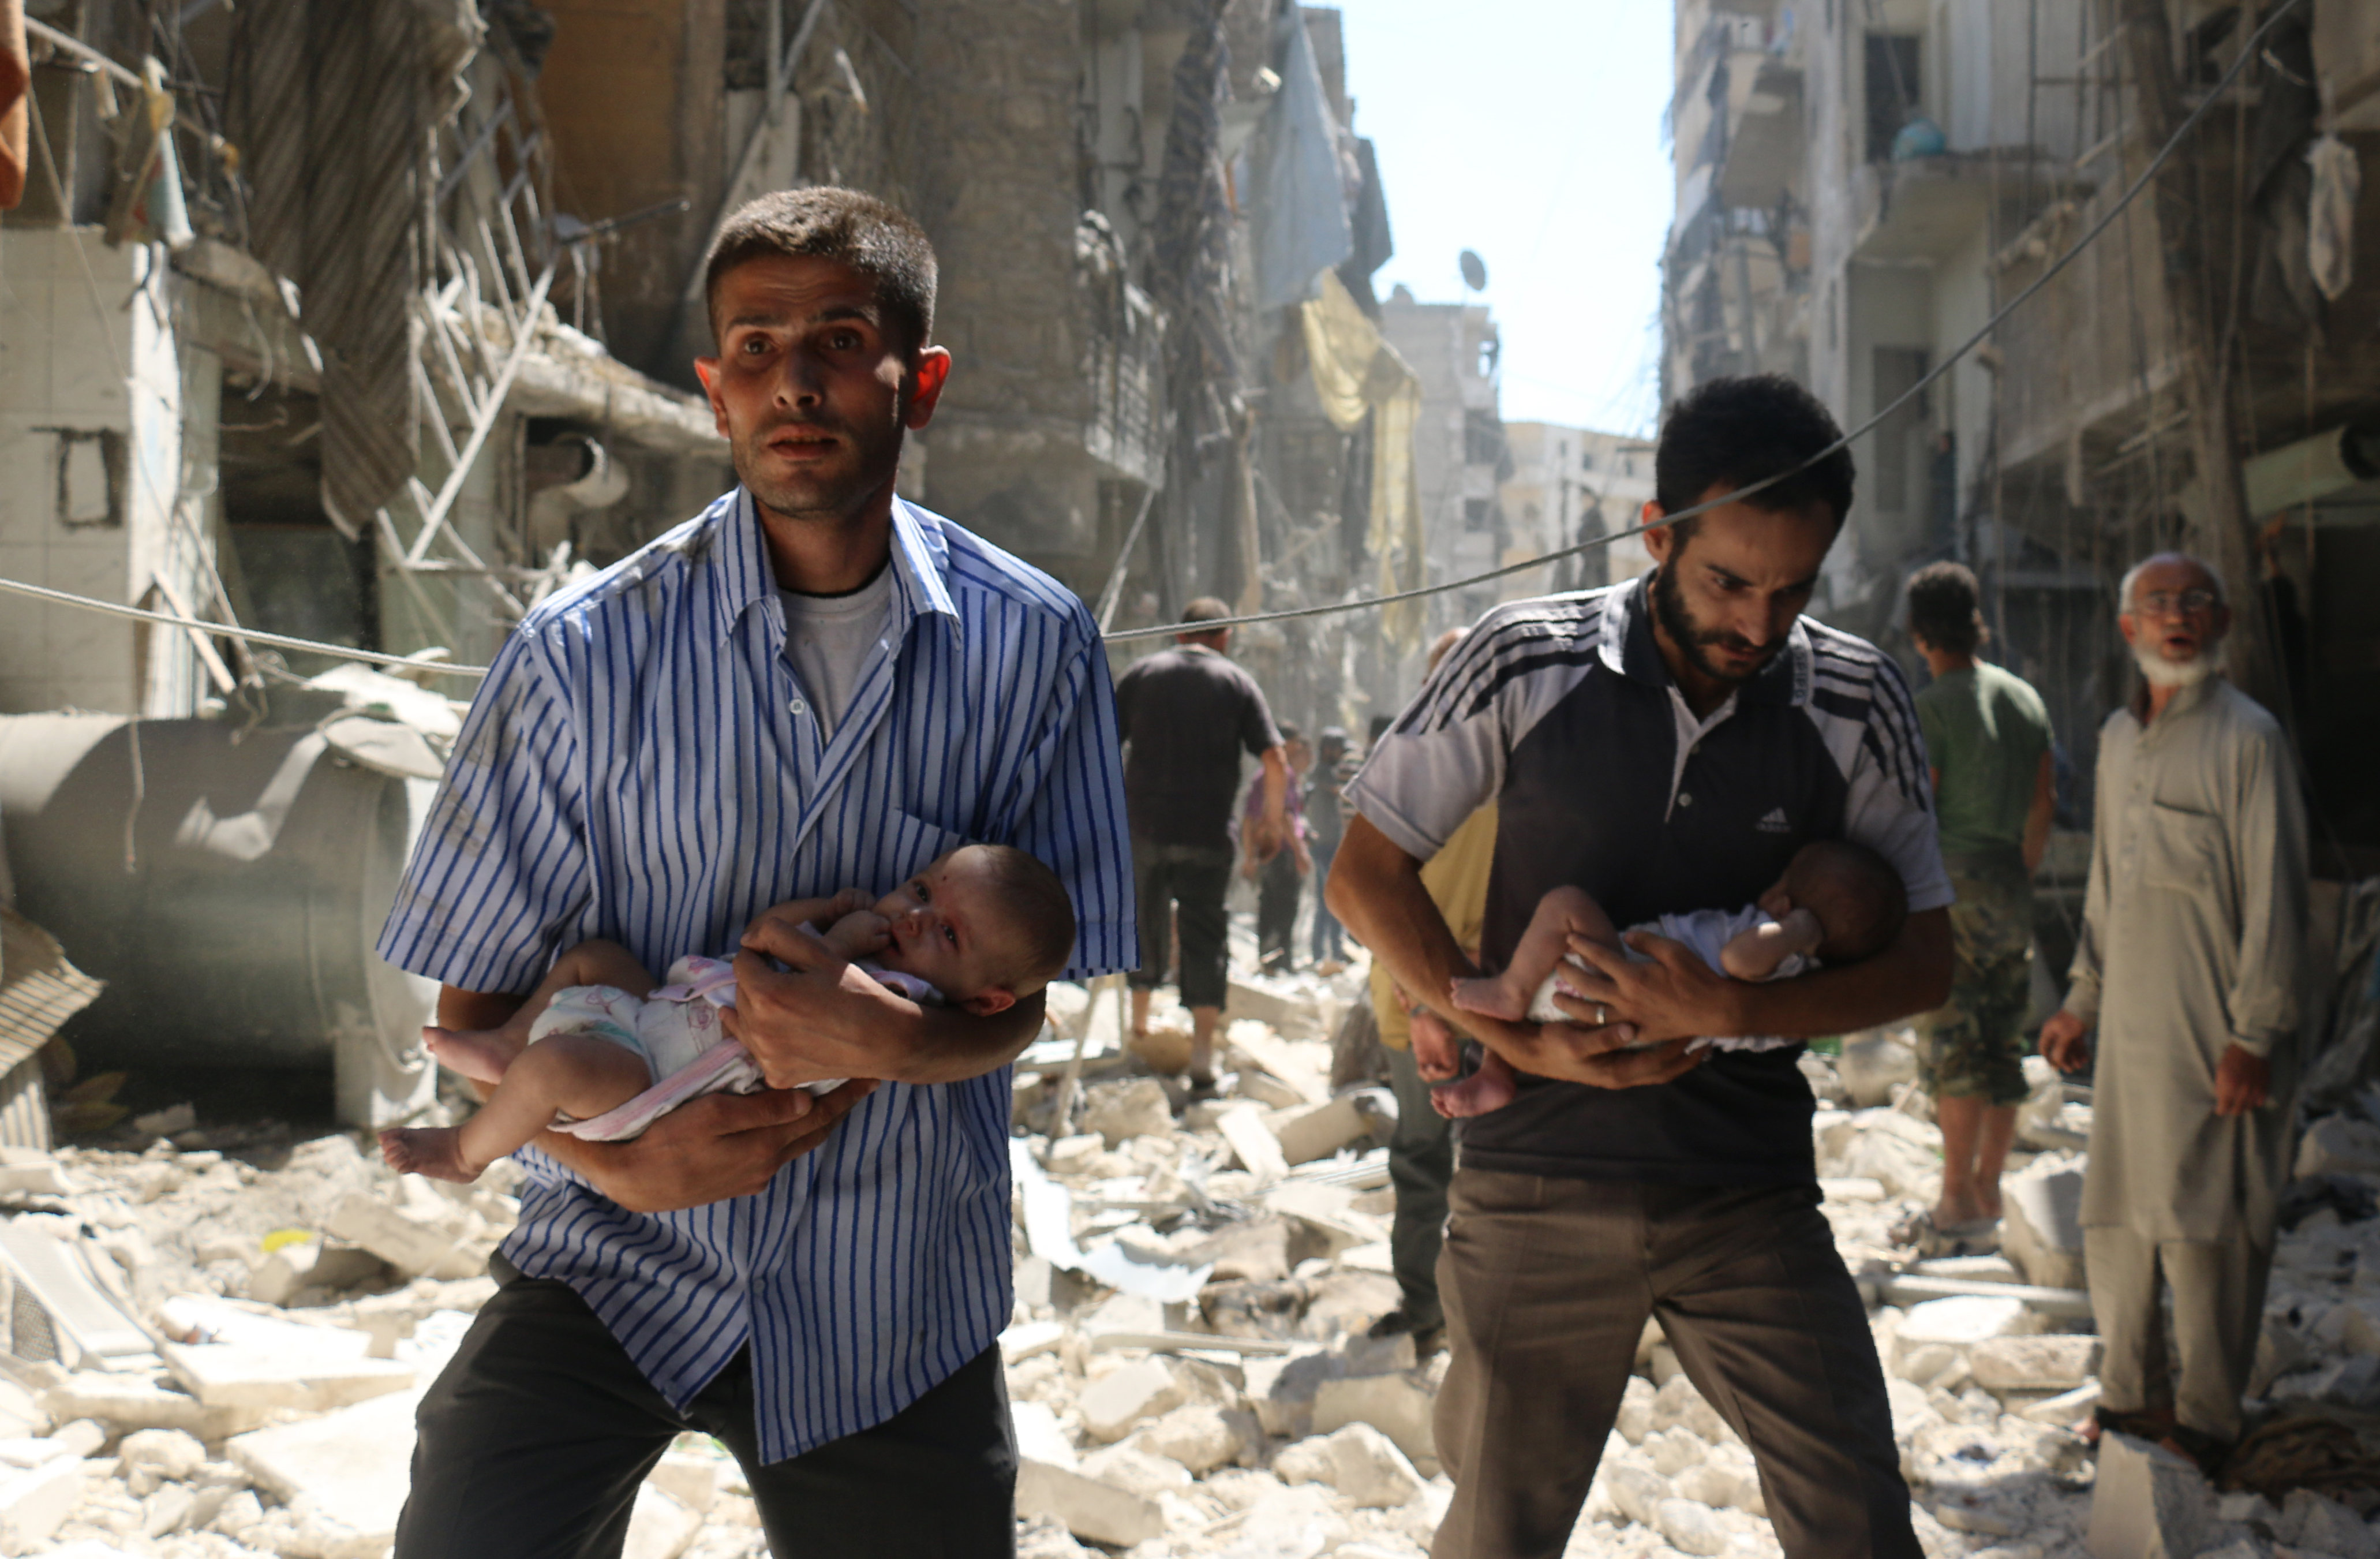 Syrian men carrying babies make their way through the rubble of destroyed buildings following a reported air strike on the rebel-held Salihin neighbourhood of the northern city of Aleppo, on September 11, 2016. Air strikes have killed dozens in rebel-held parts of Syria as the opposition considers whether to join a US-Russia truce deal due to take effect on September 12. / AFP PHOTO / AMEER ALHALBI